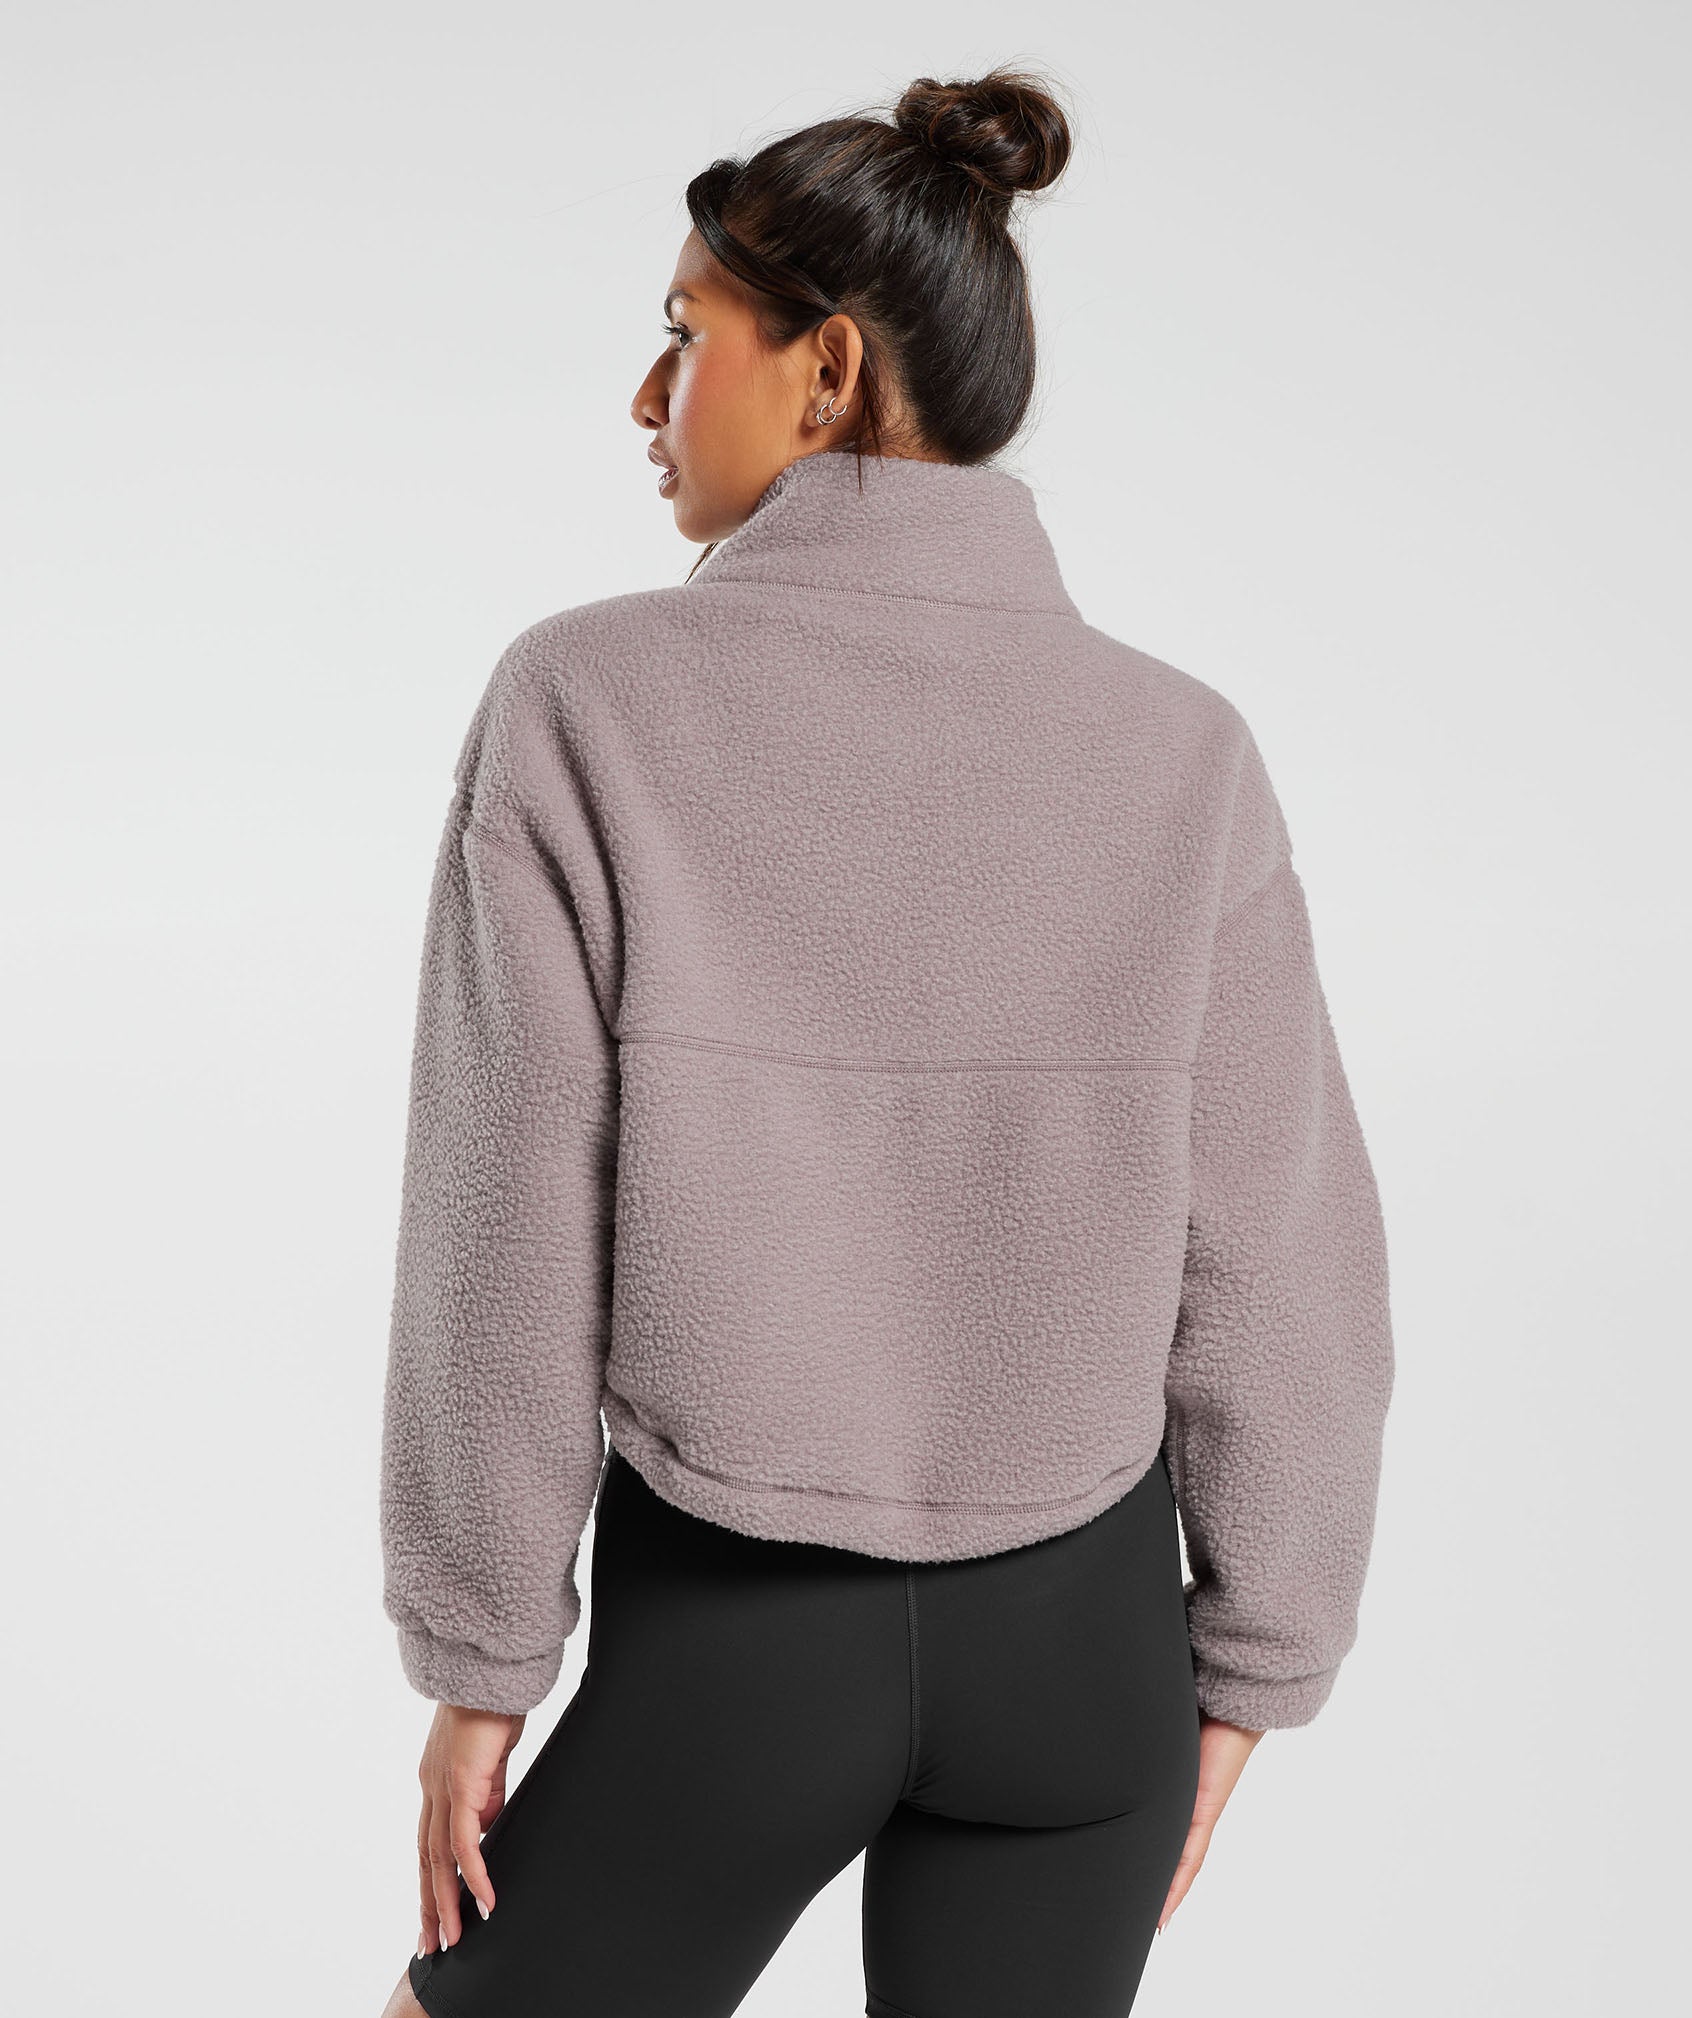 Elevate Fleece Midi Jacket in Washed Mauve - view 2